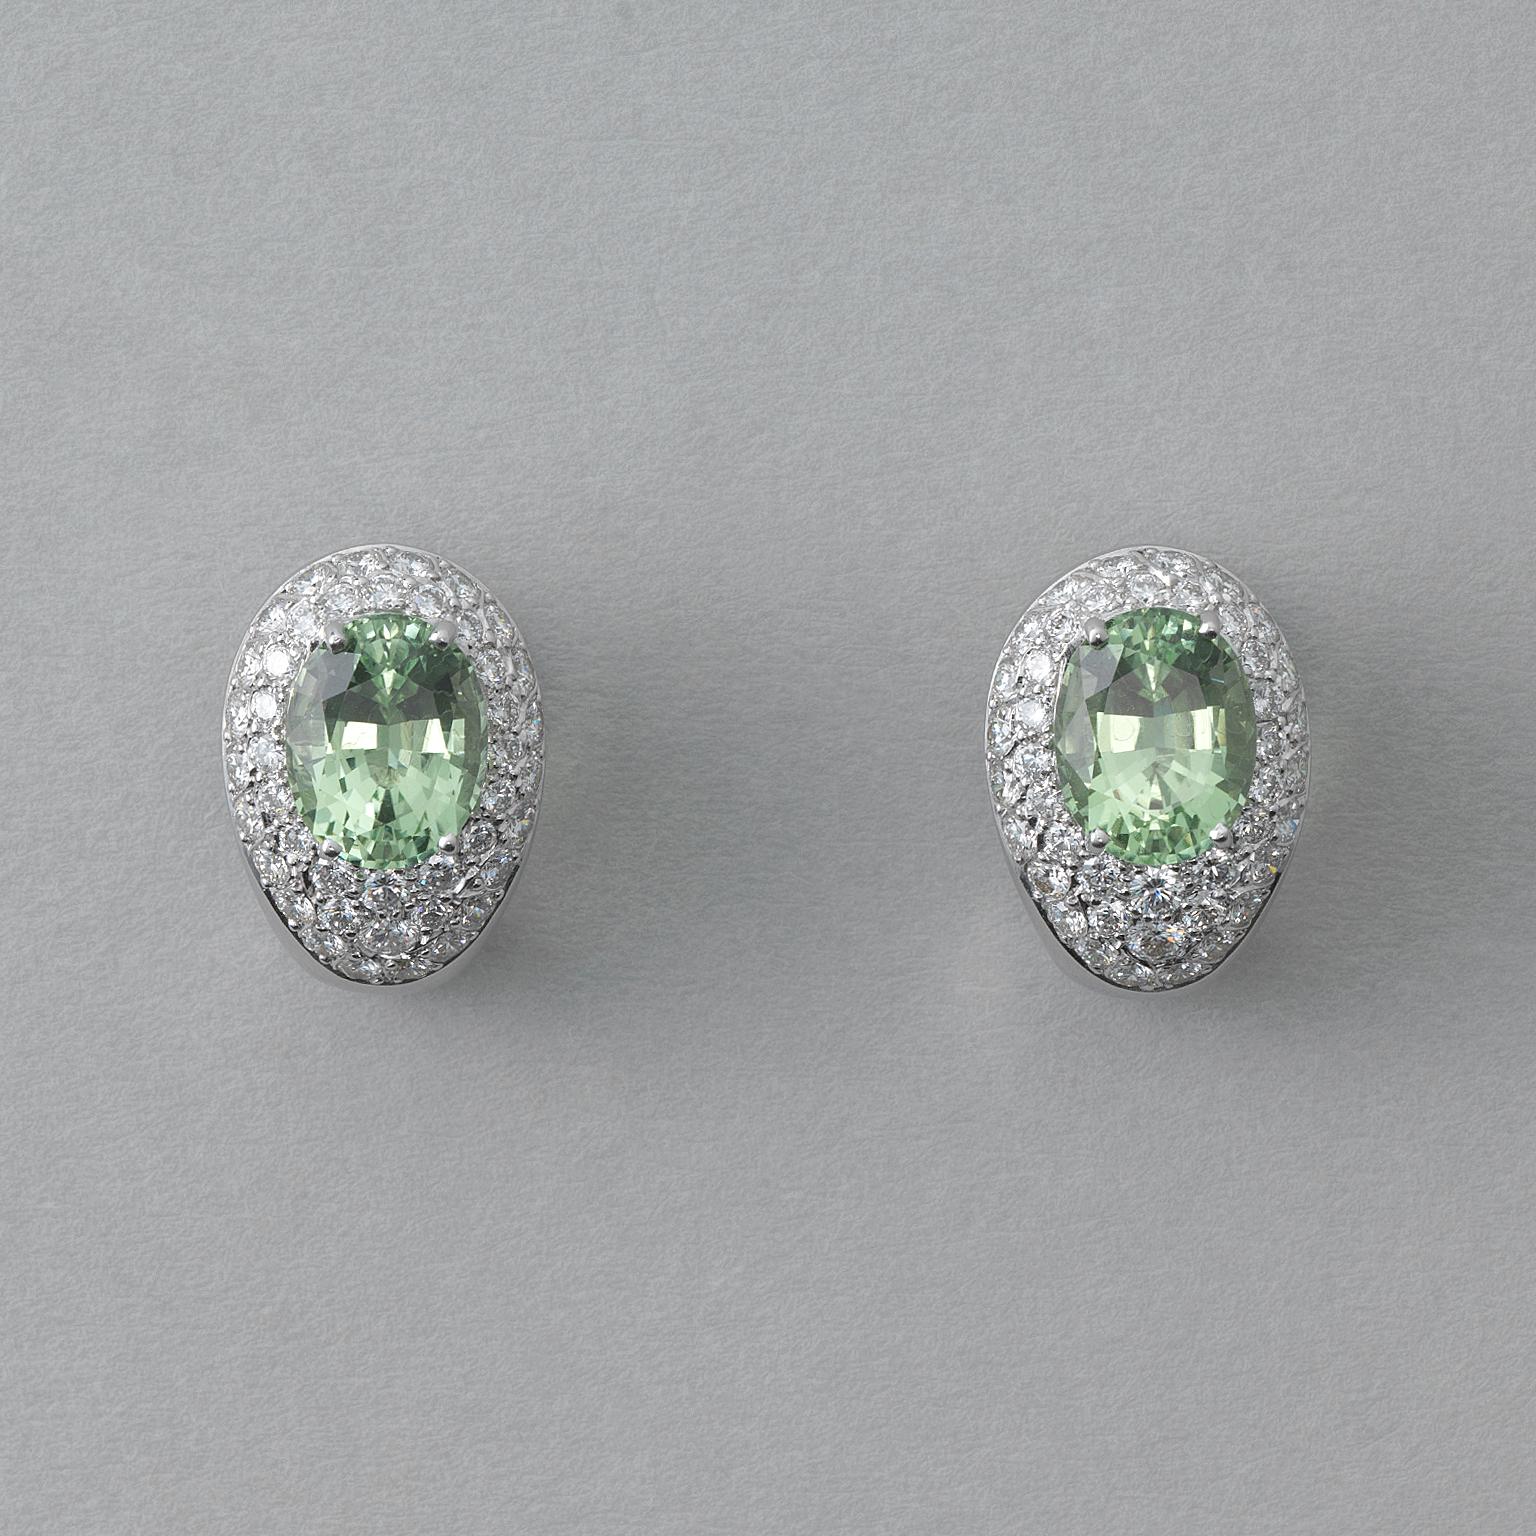 A pair of egg-shaped ear clips, 18 carat gold rhodium plated, pavé set with 84 diamonds (app. 2.14 carat in total) set with oval facetted natural mint green tourmalines (app. 7.03 carat in total), unworn, modern.
 
weight: 12.96 grams
dimensions: